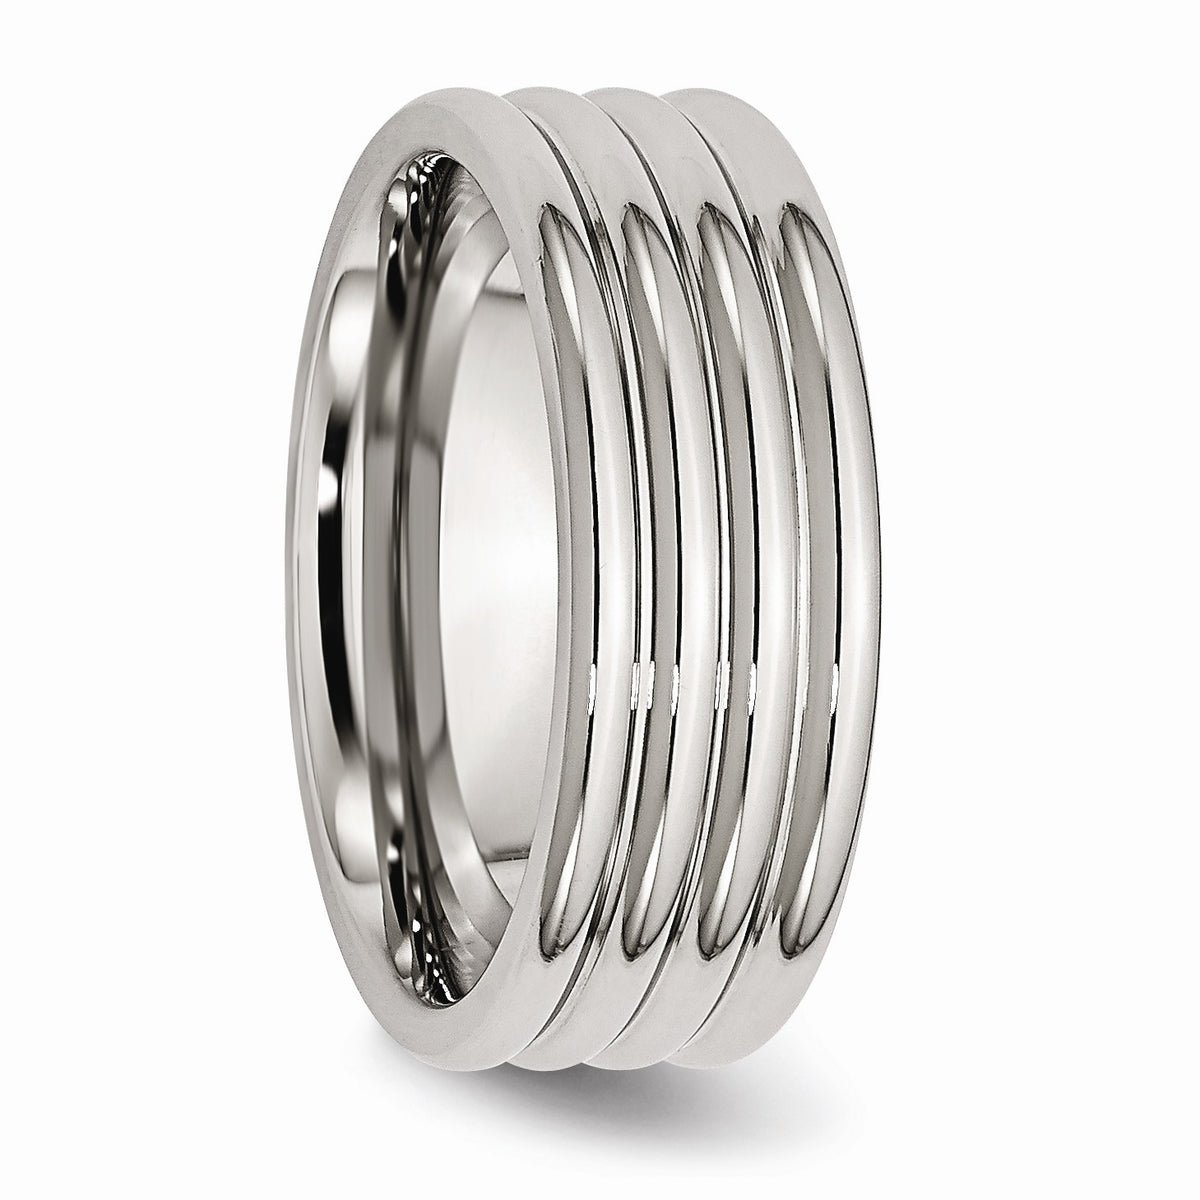 Alternate view of the Stainless Steel, 8mm Multi Grooved Unisex Comfort Fit Band by The Black Bow Jewelry Co.